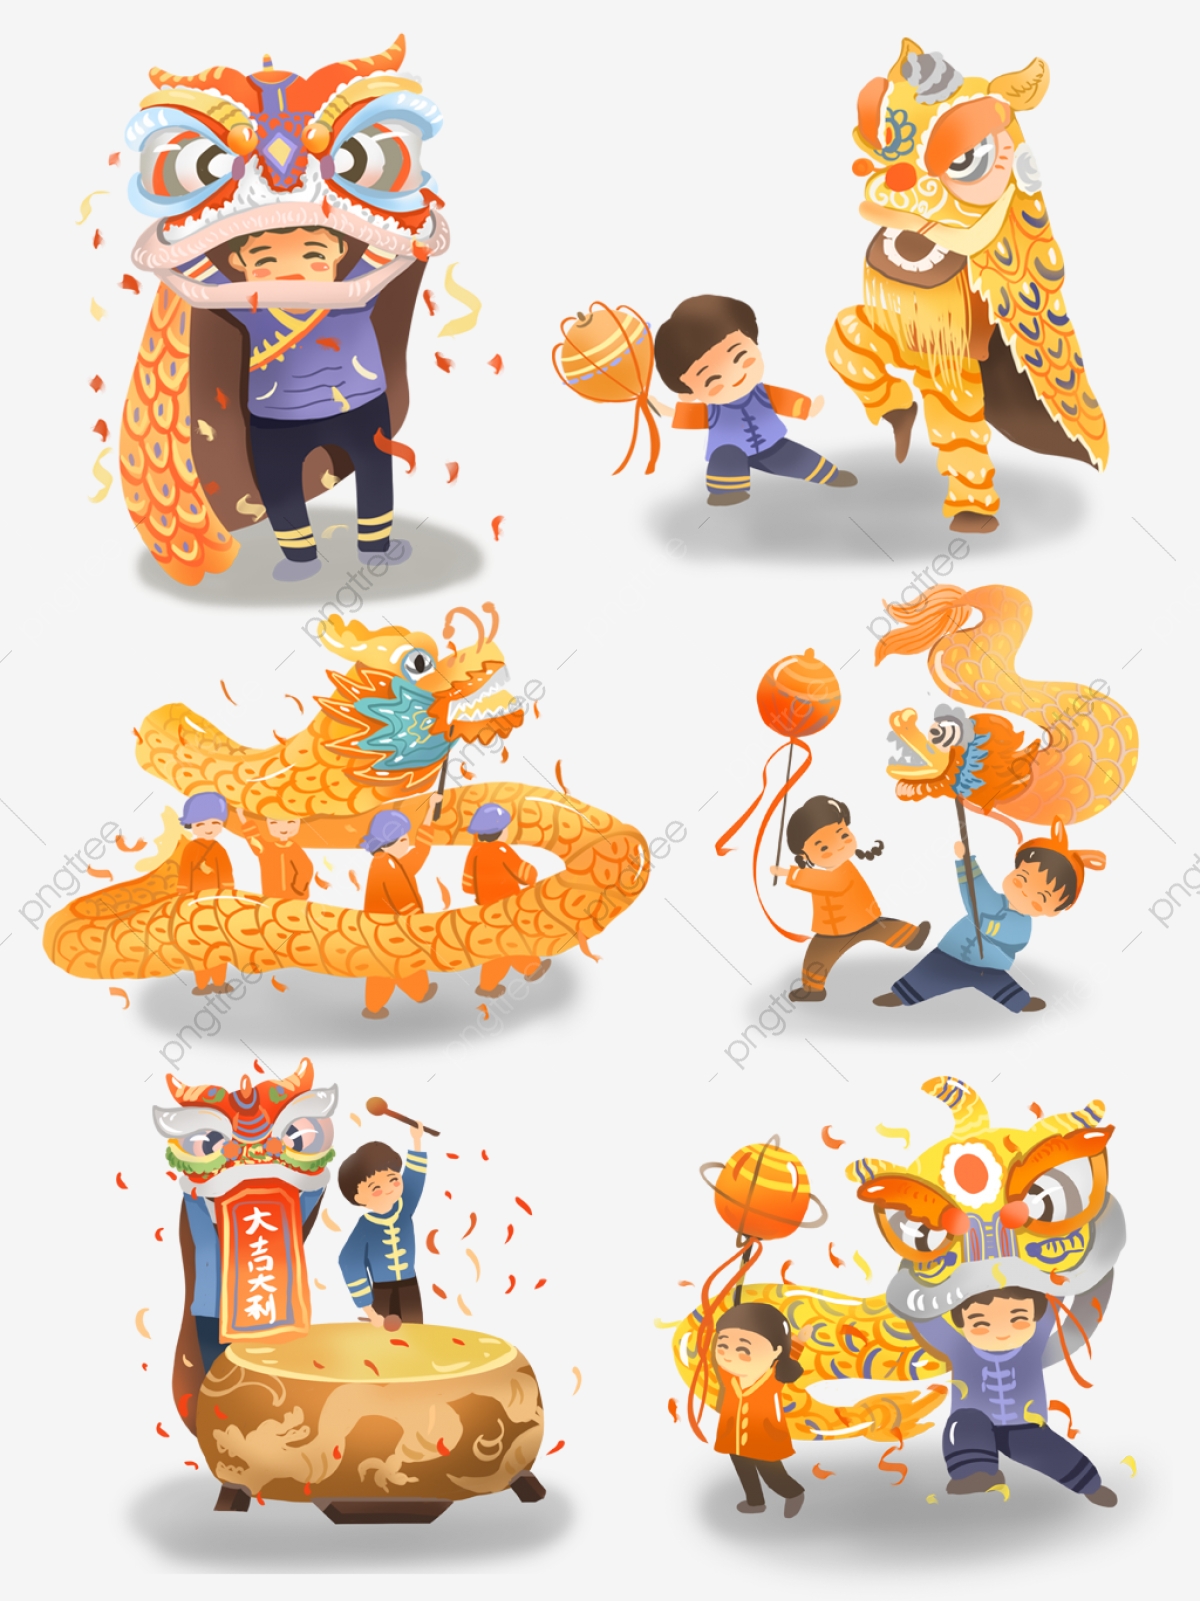 pngtree-new-year-dance-lion-dance-business-illustration-commercial-elements-year-png-image_4054629.jpg